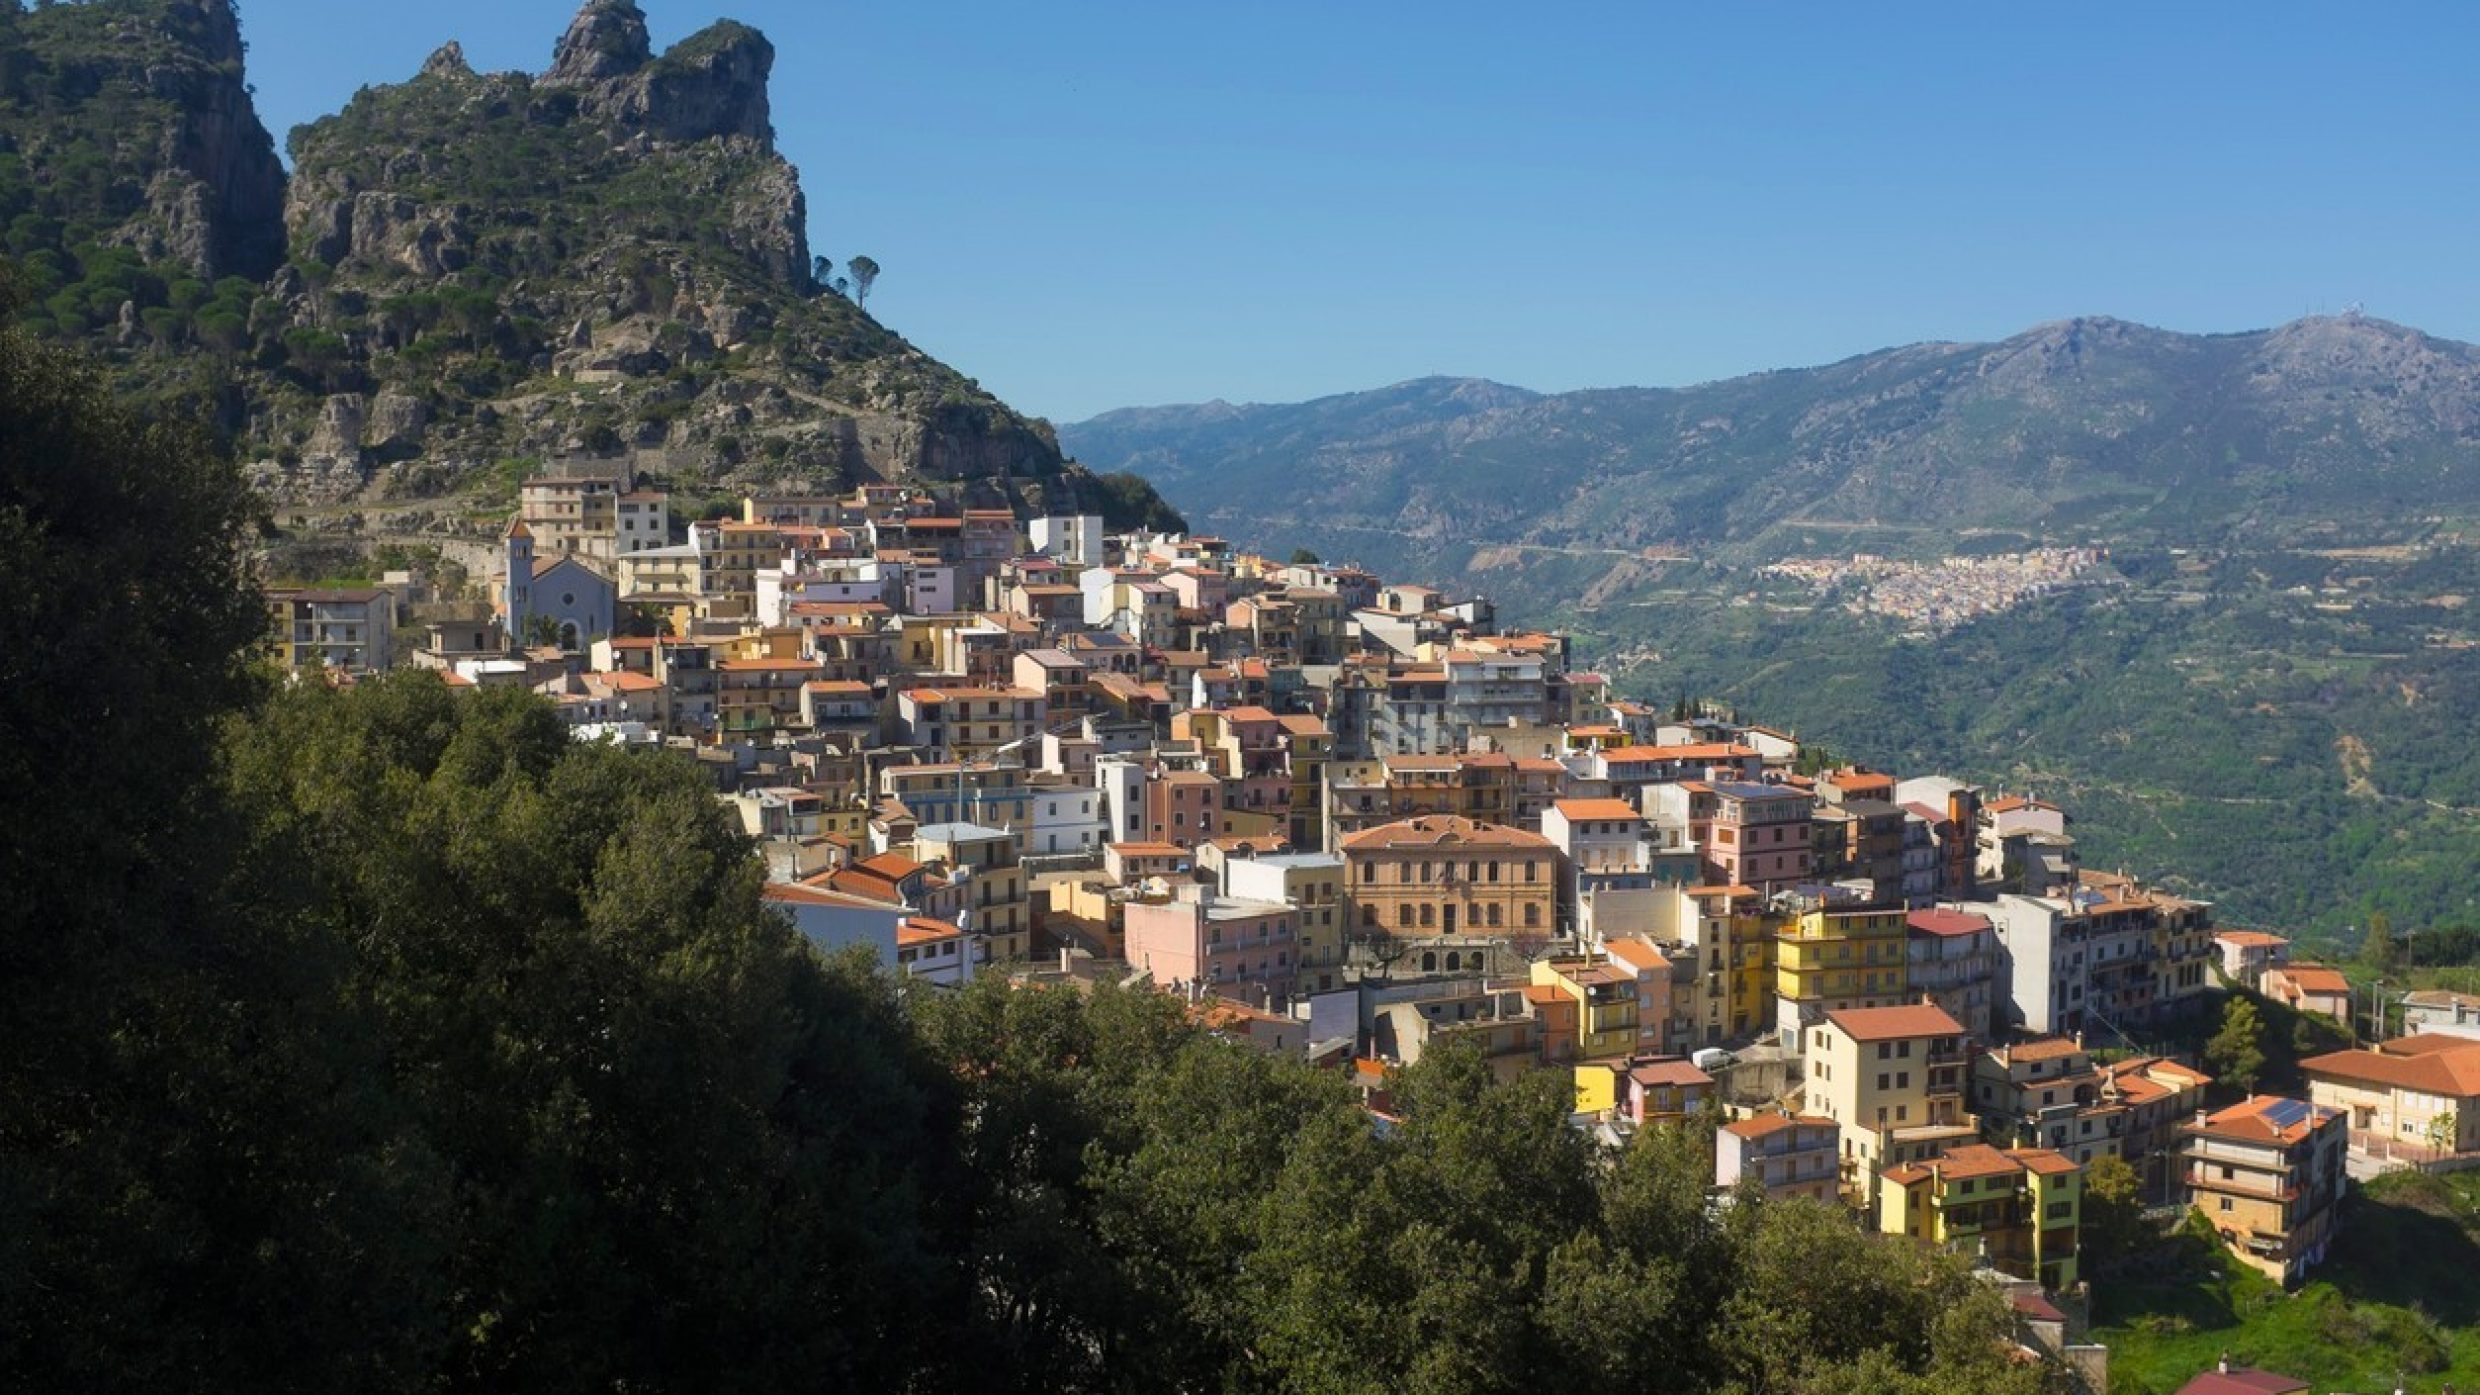 The mountain region of Sardinia, especially the eastern province of Nuoro, is a stronghold of longevity. A noteworthy point: men live just as long as women, while life expectancy in the industrialised world is lower by about seven years for men. One prominent example was Antonio Todde, who died in 2002 shortly before his 113th birthday – as the world’s officially oldest man.